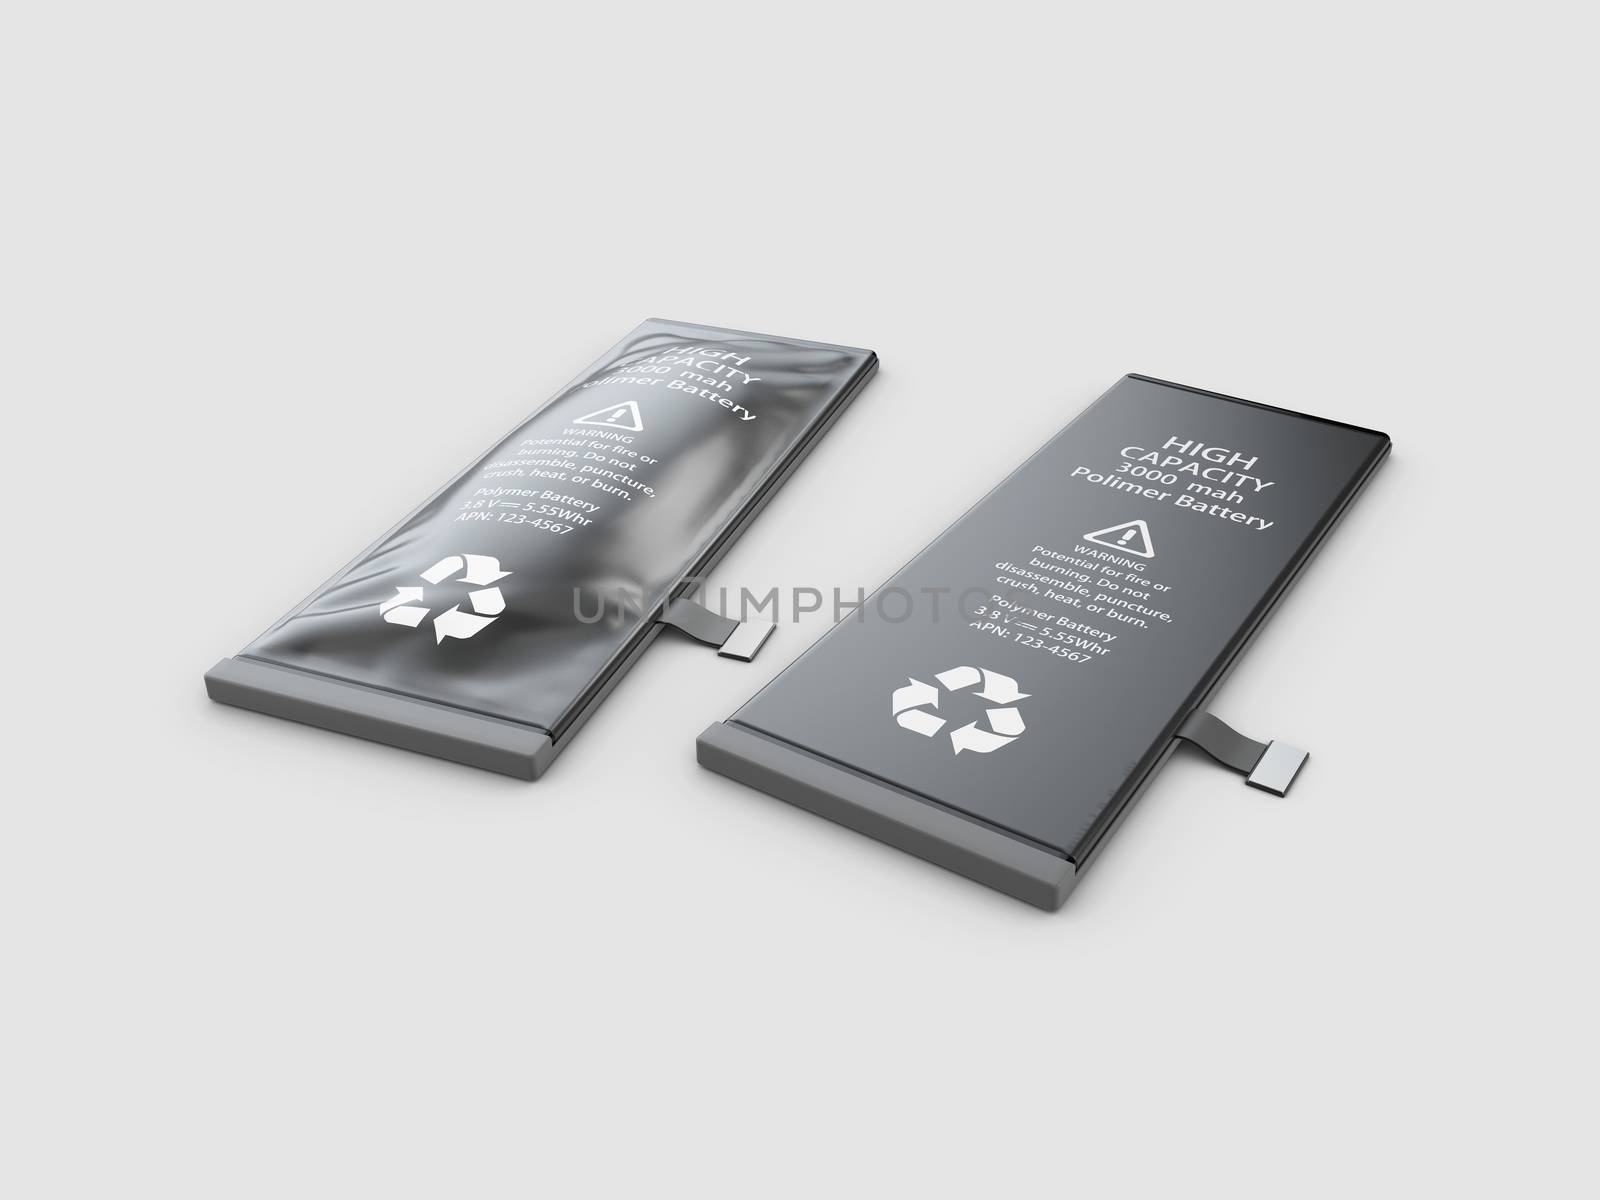 3d Illustration of Swollen mobile phone battery. Expired or low quality battery by tussik